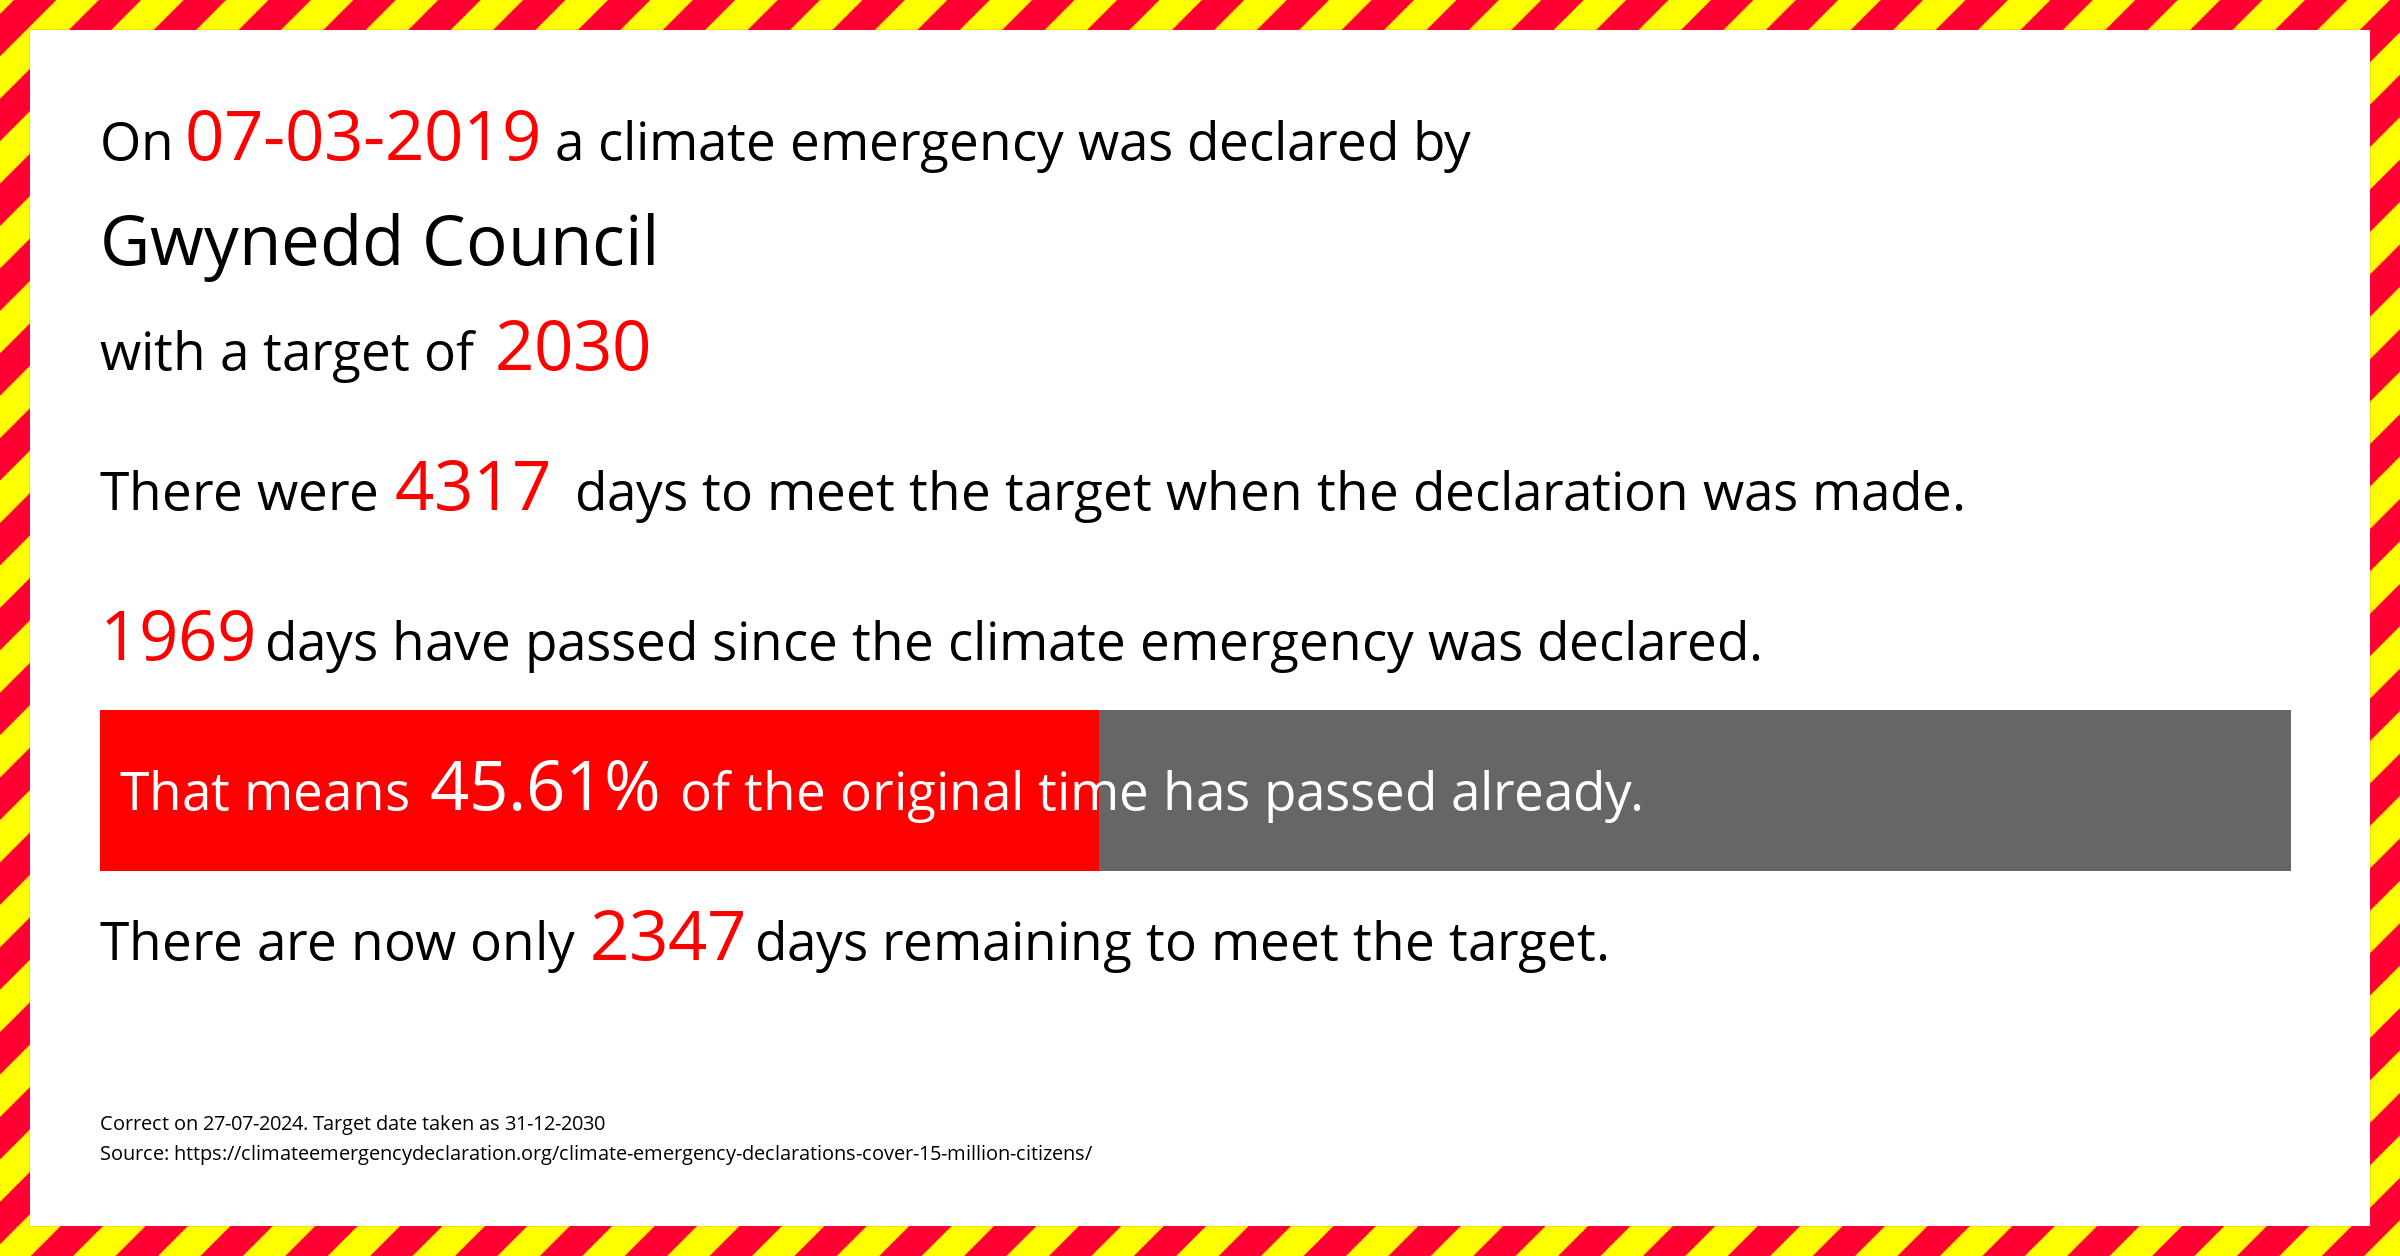 Gwynedd Council declared a Climate emergency on Thursday 7th March 2019, with a target of 2030.